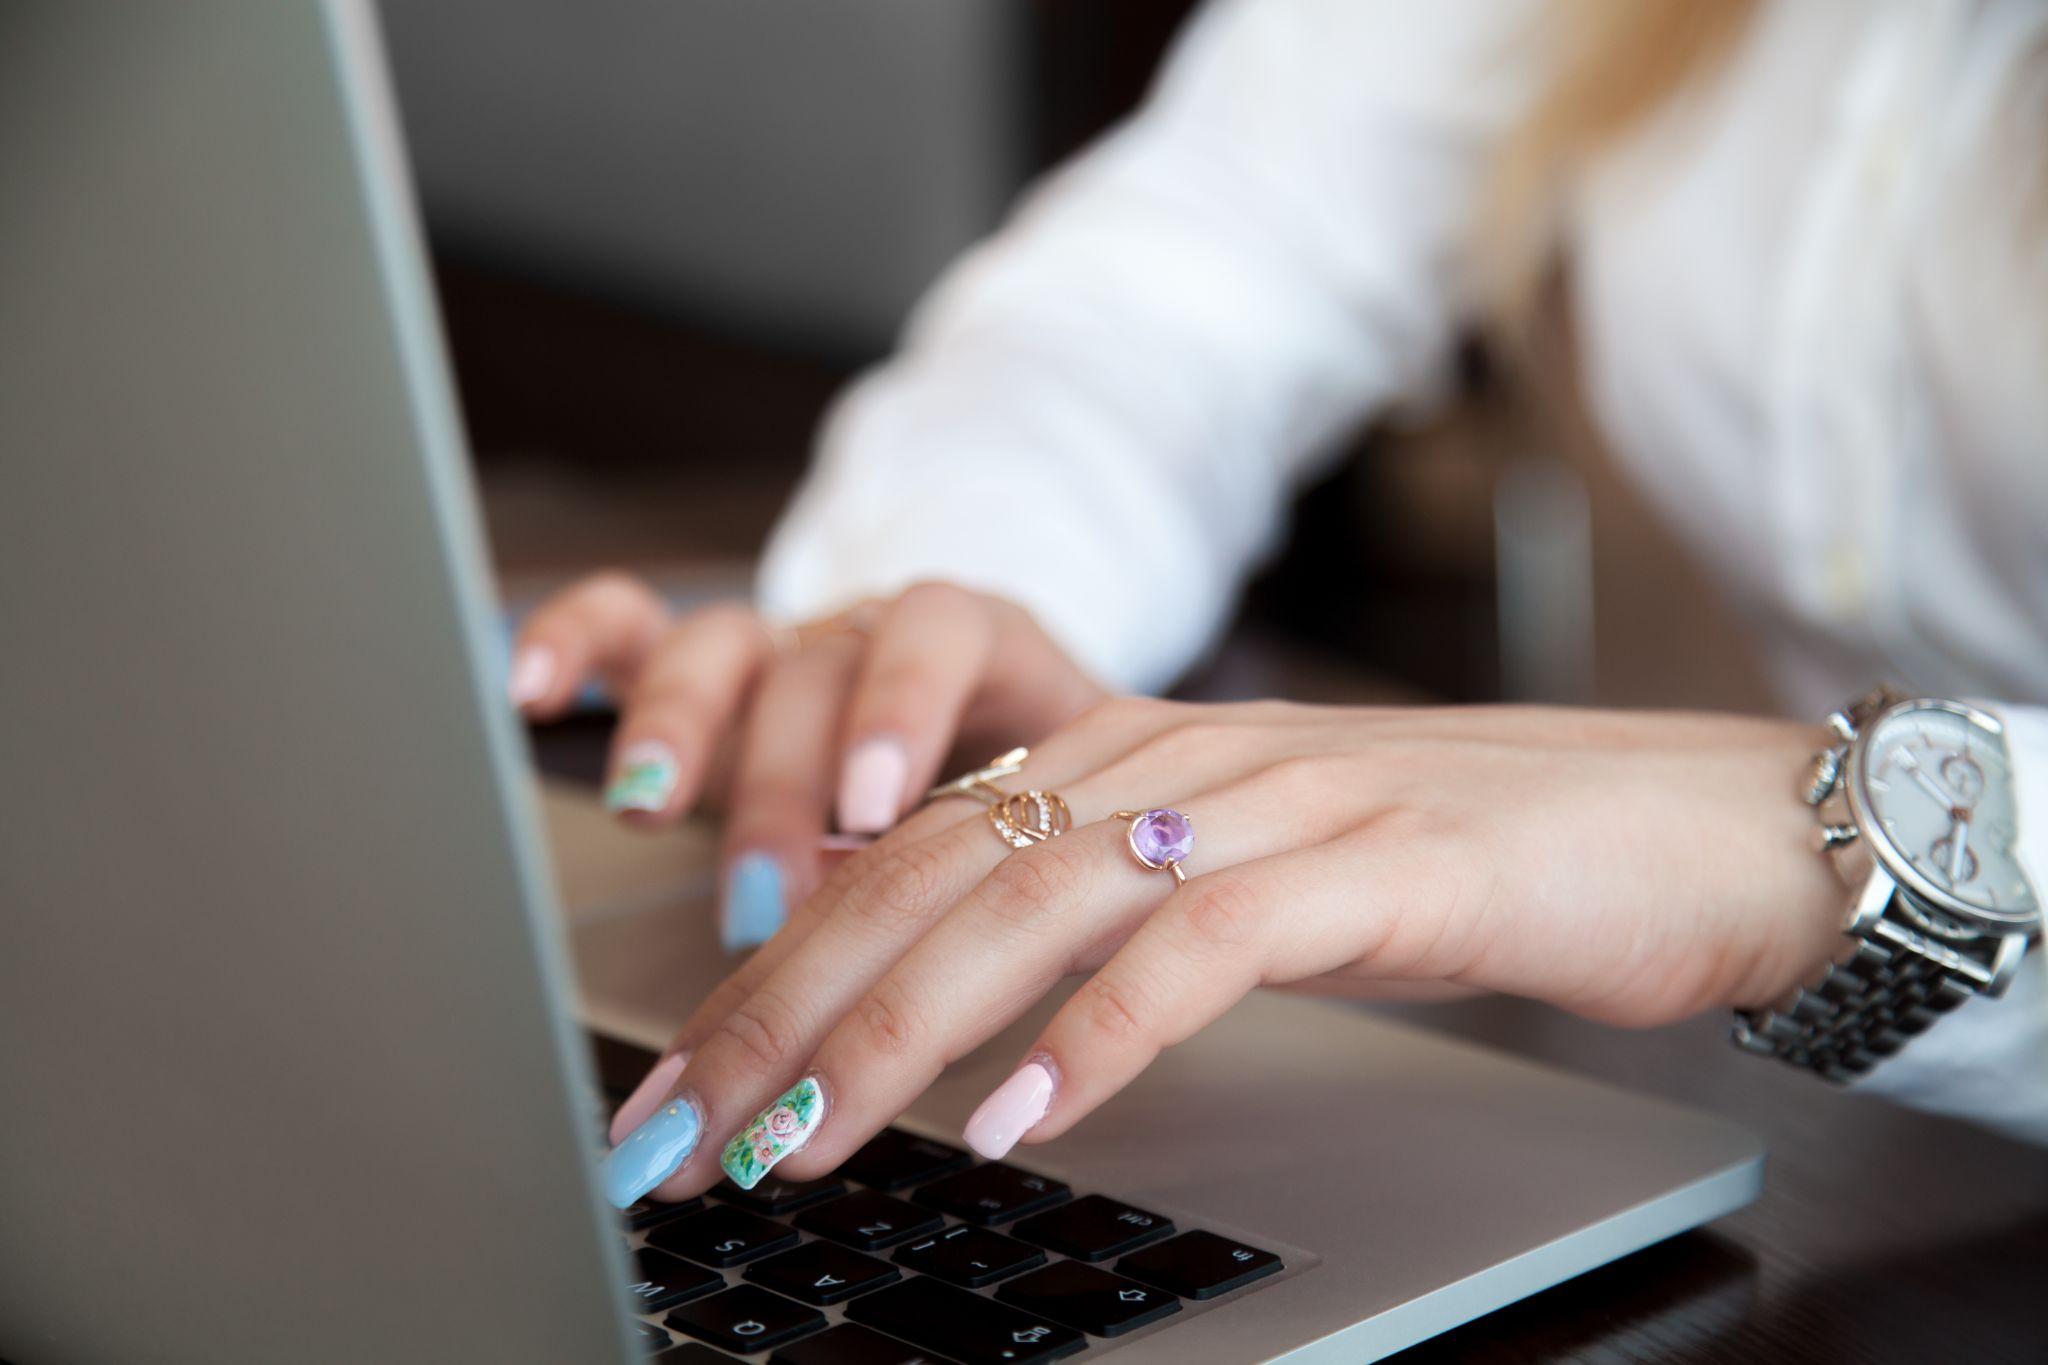 Girl hands on laptop using touch pad and keyboard with rings on fingers and colorful manicure